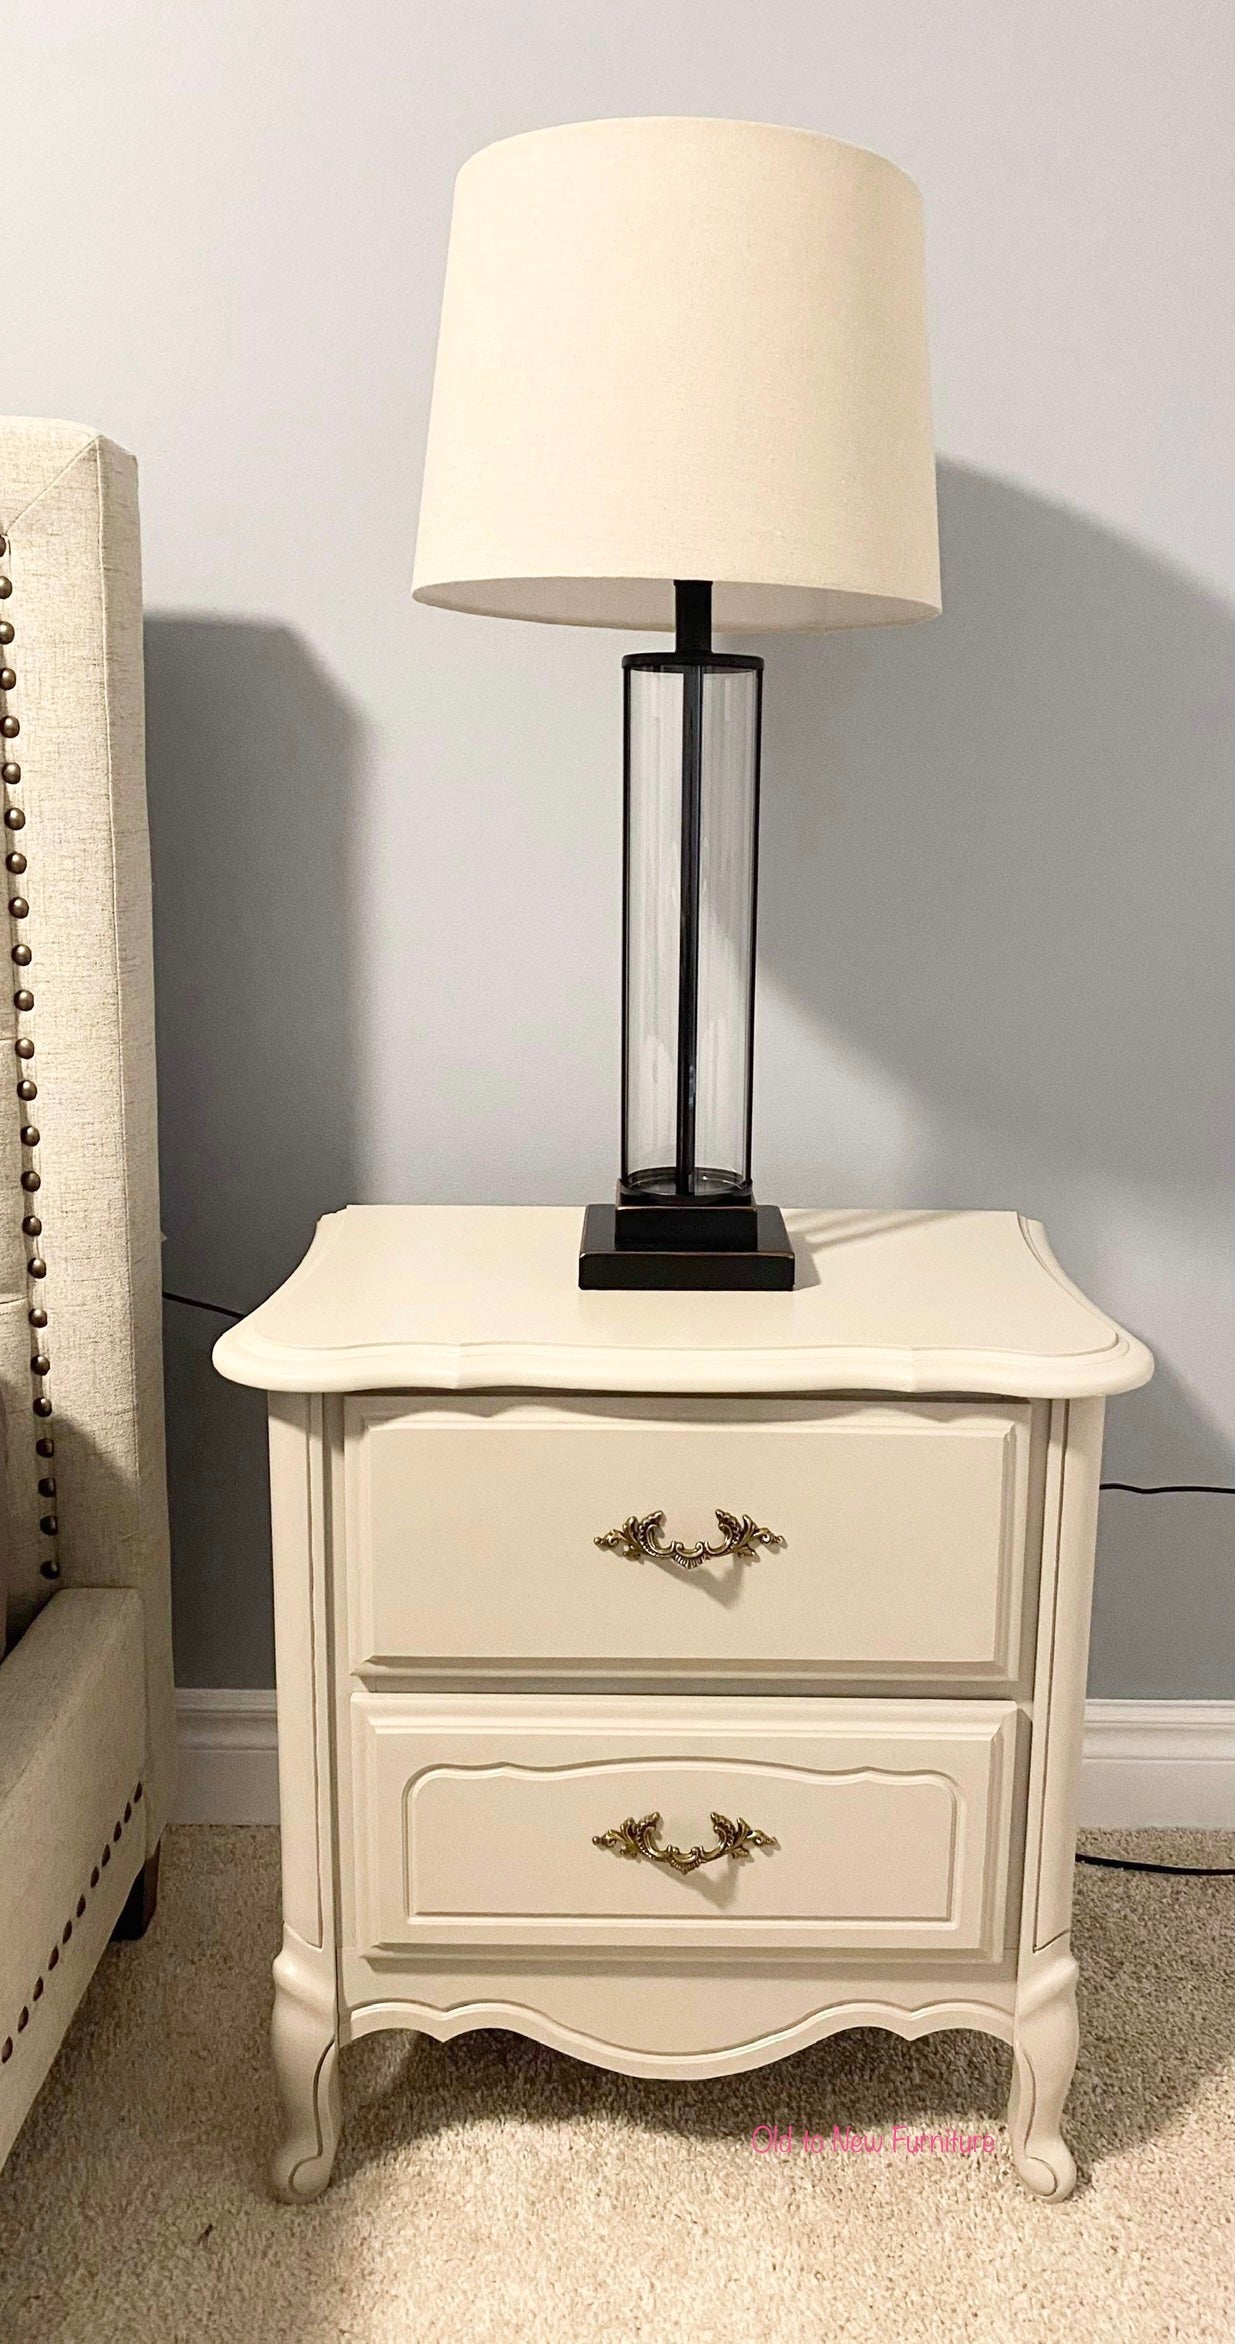 Gorgeous Customized Restyled French Provincial Night Stands Painted